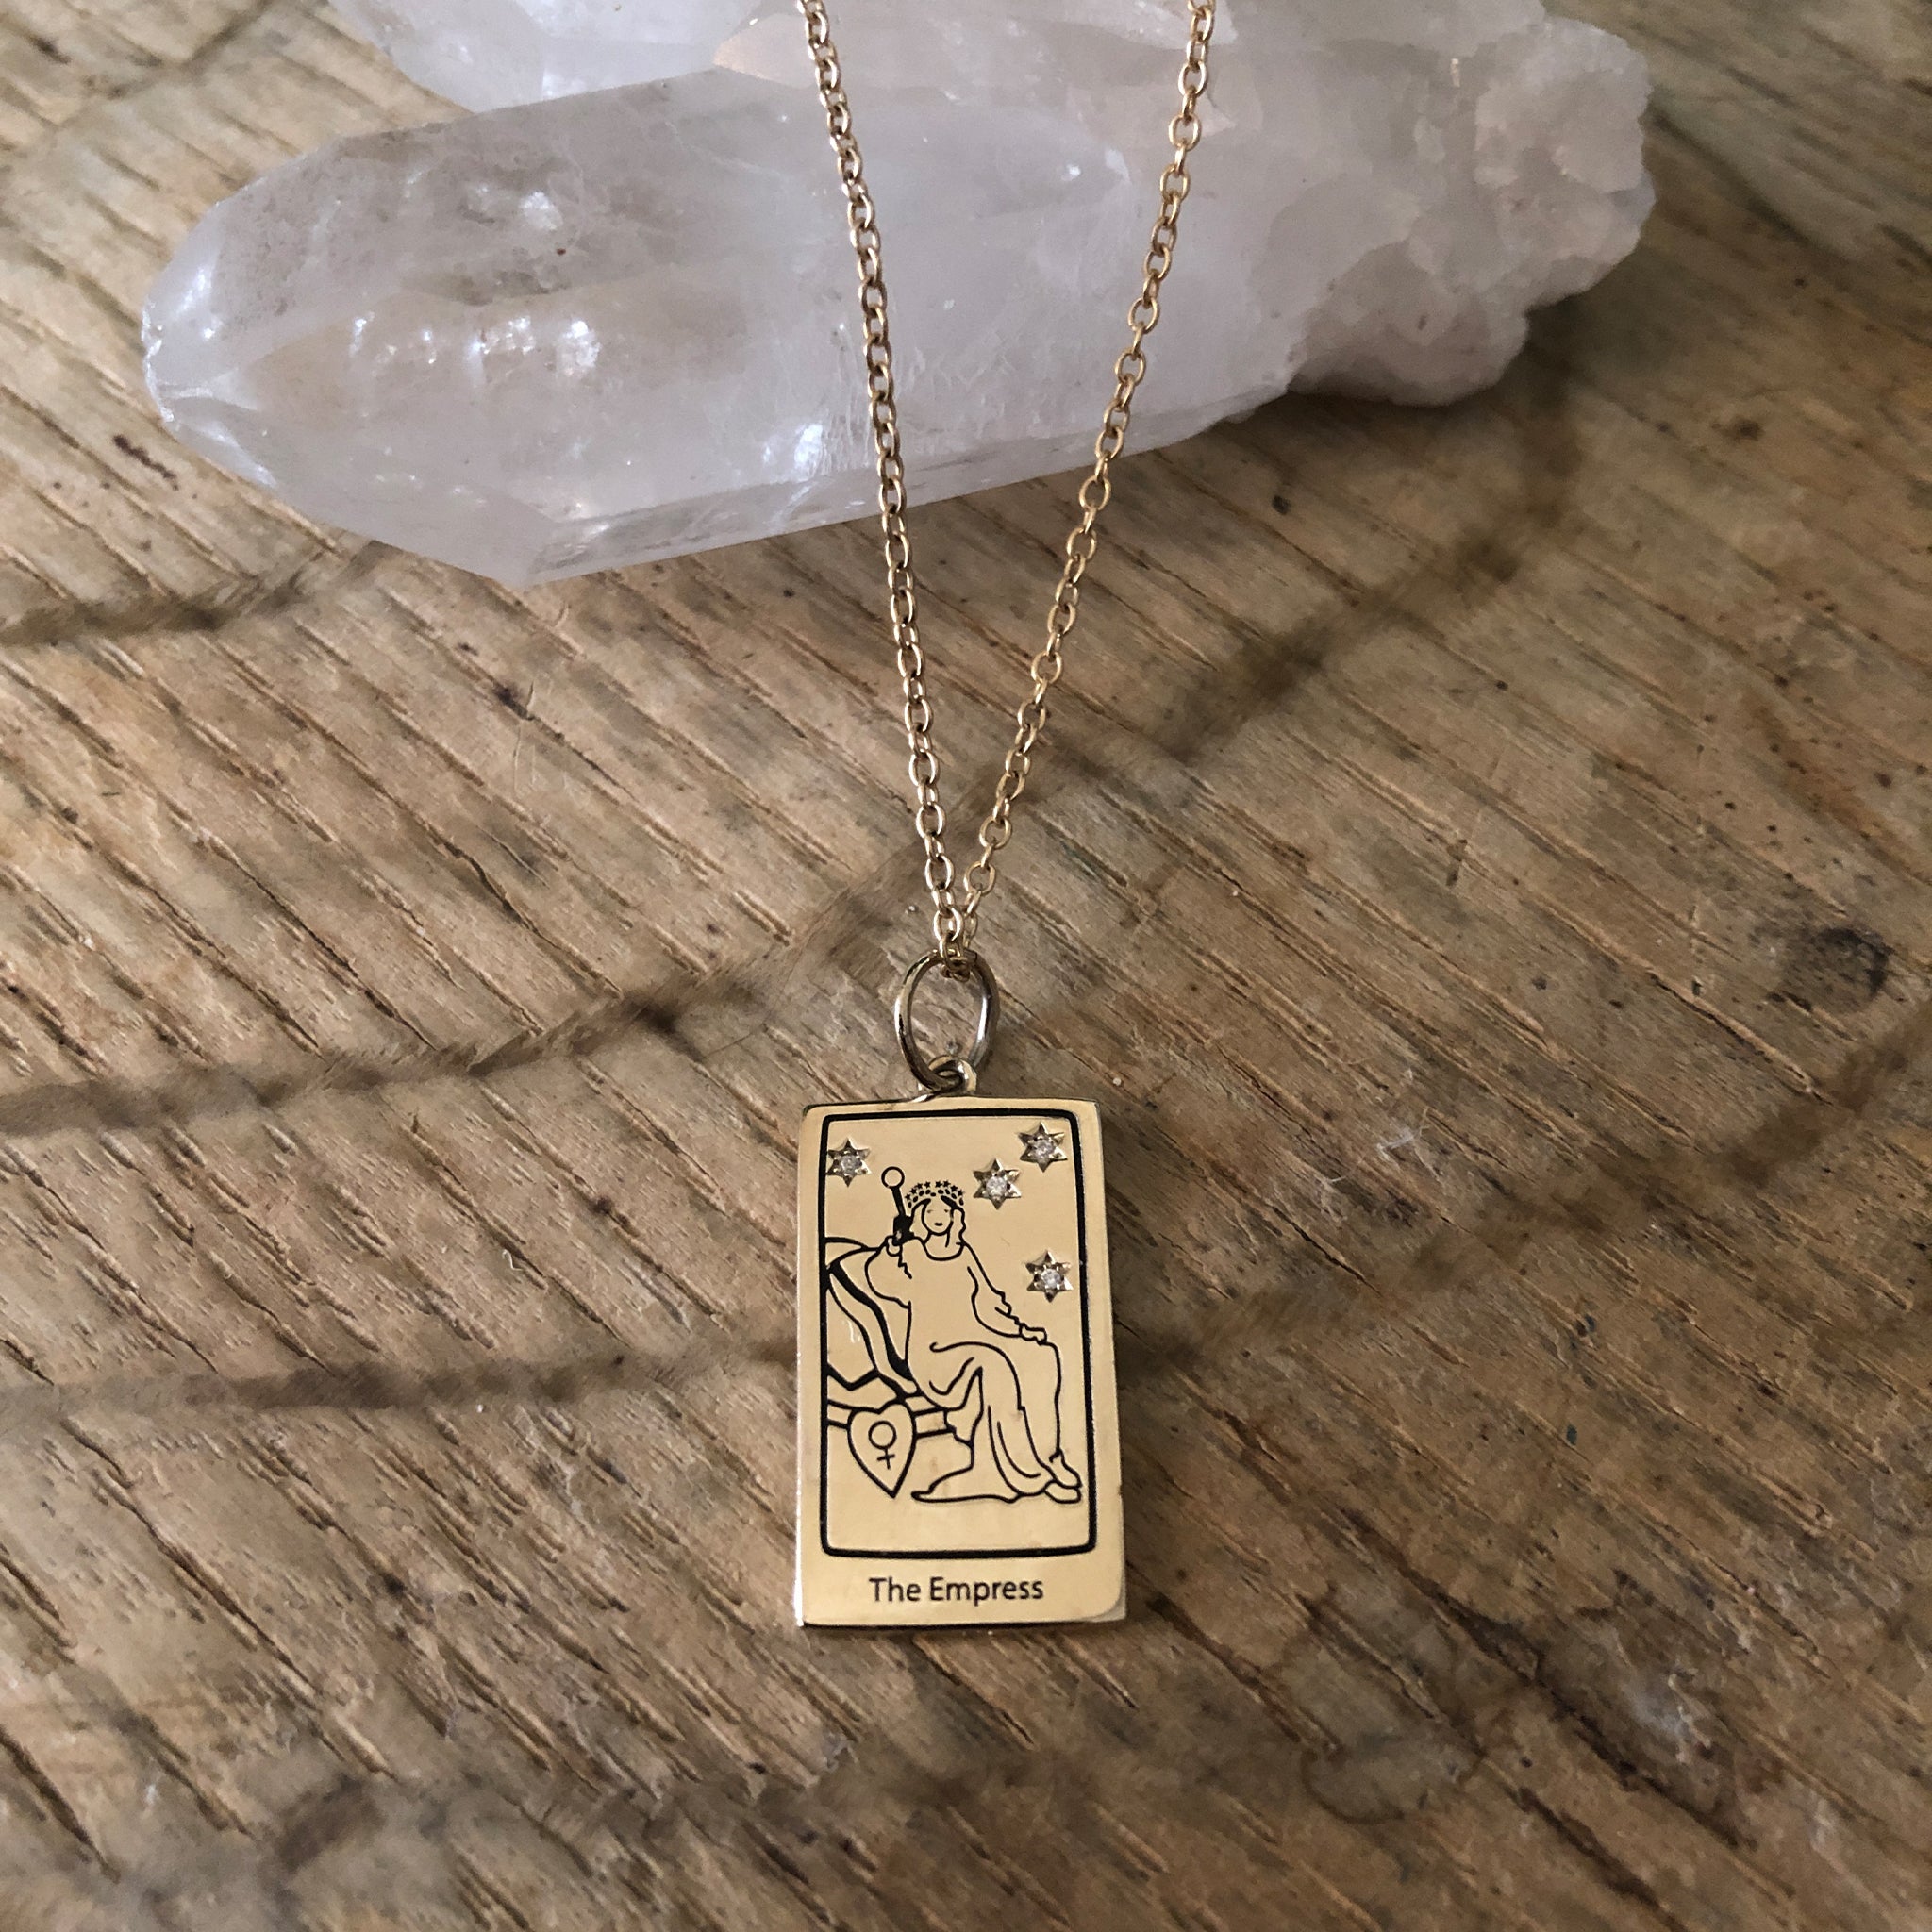 indlogering Smadre længde The Empress Tarot Charm with chain necklace - gold – Mementomoridesignsnyc